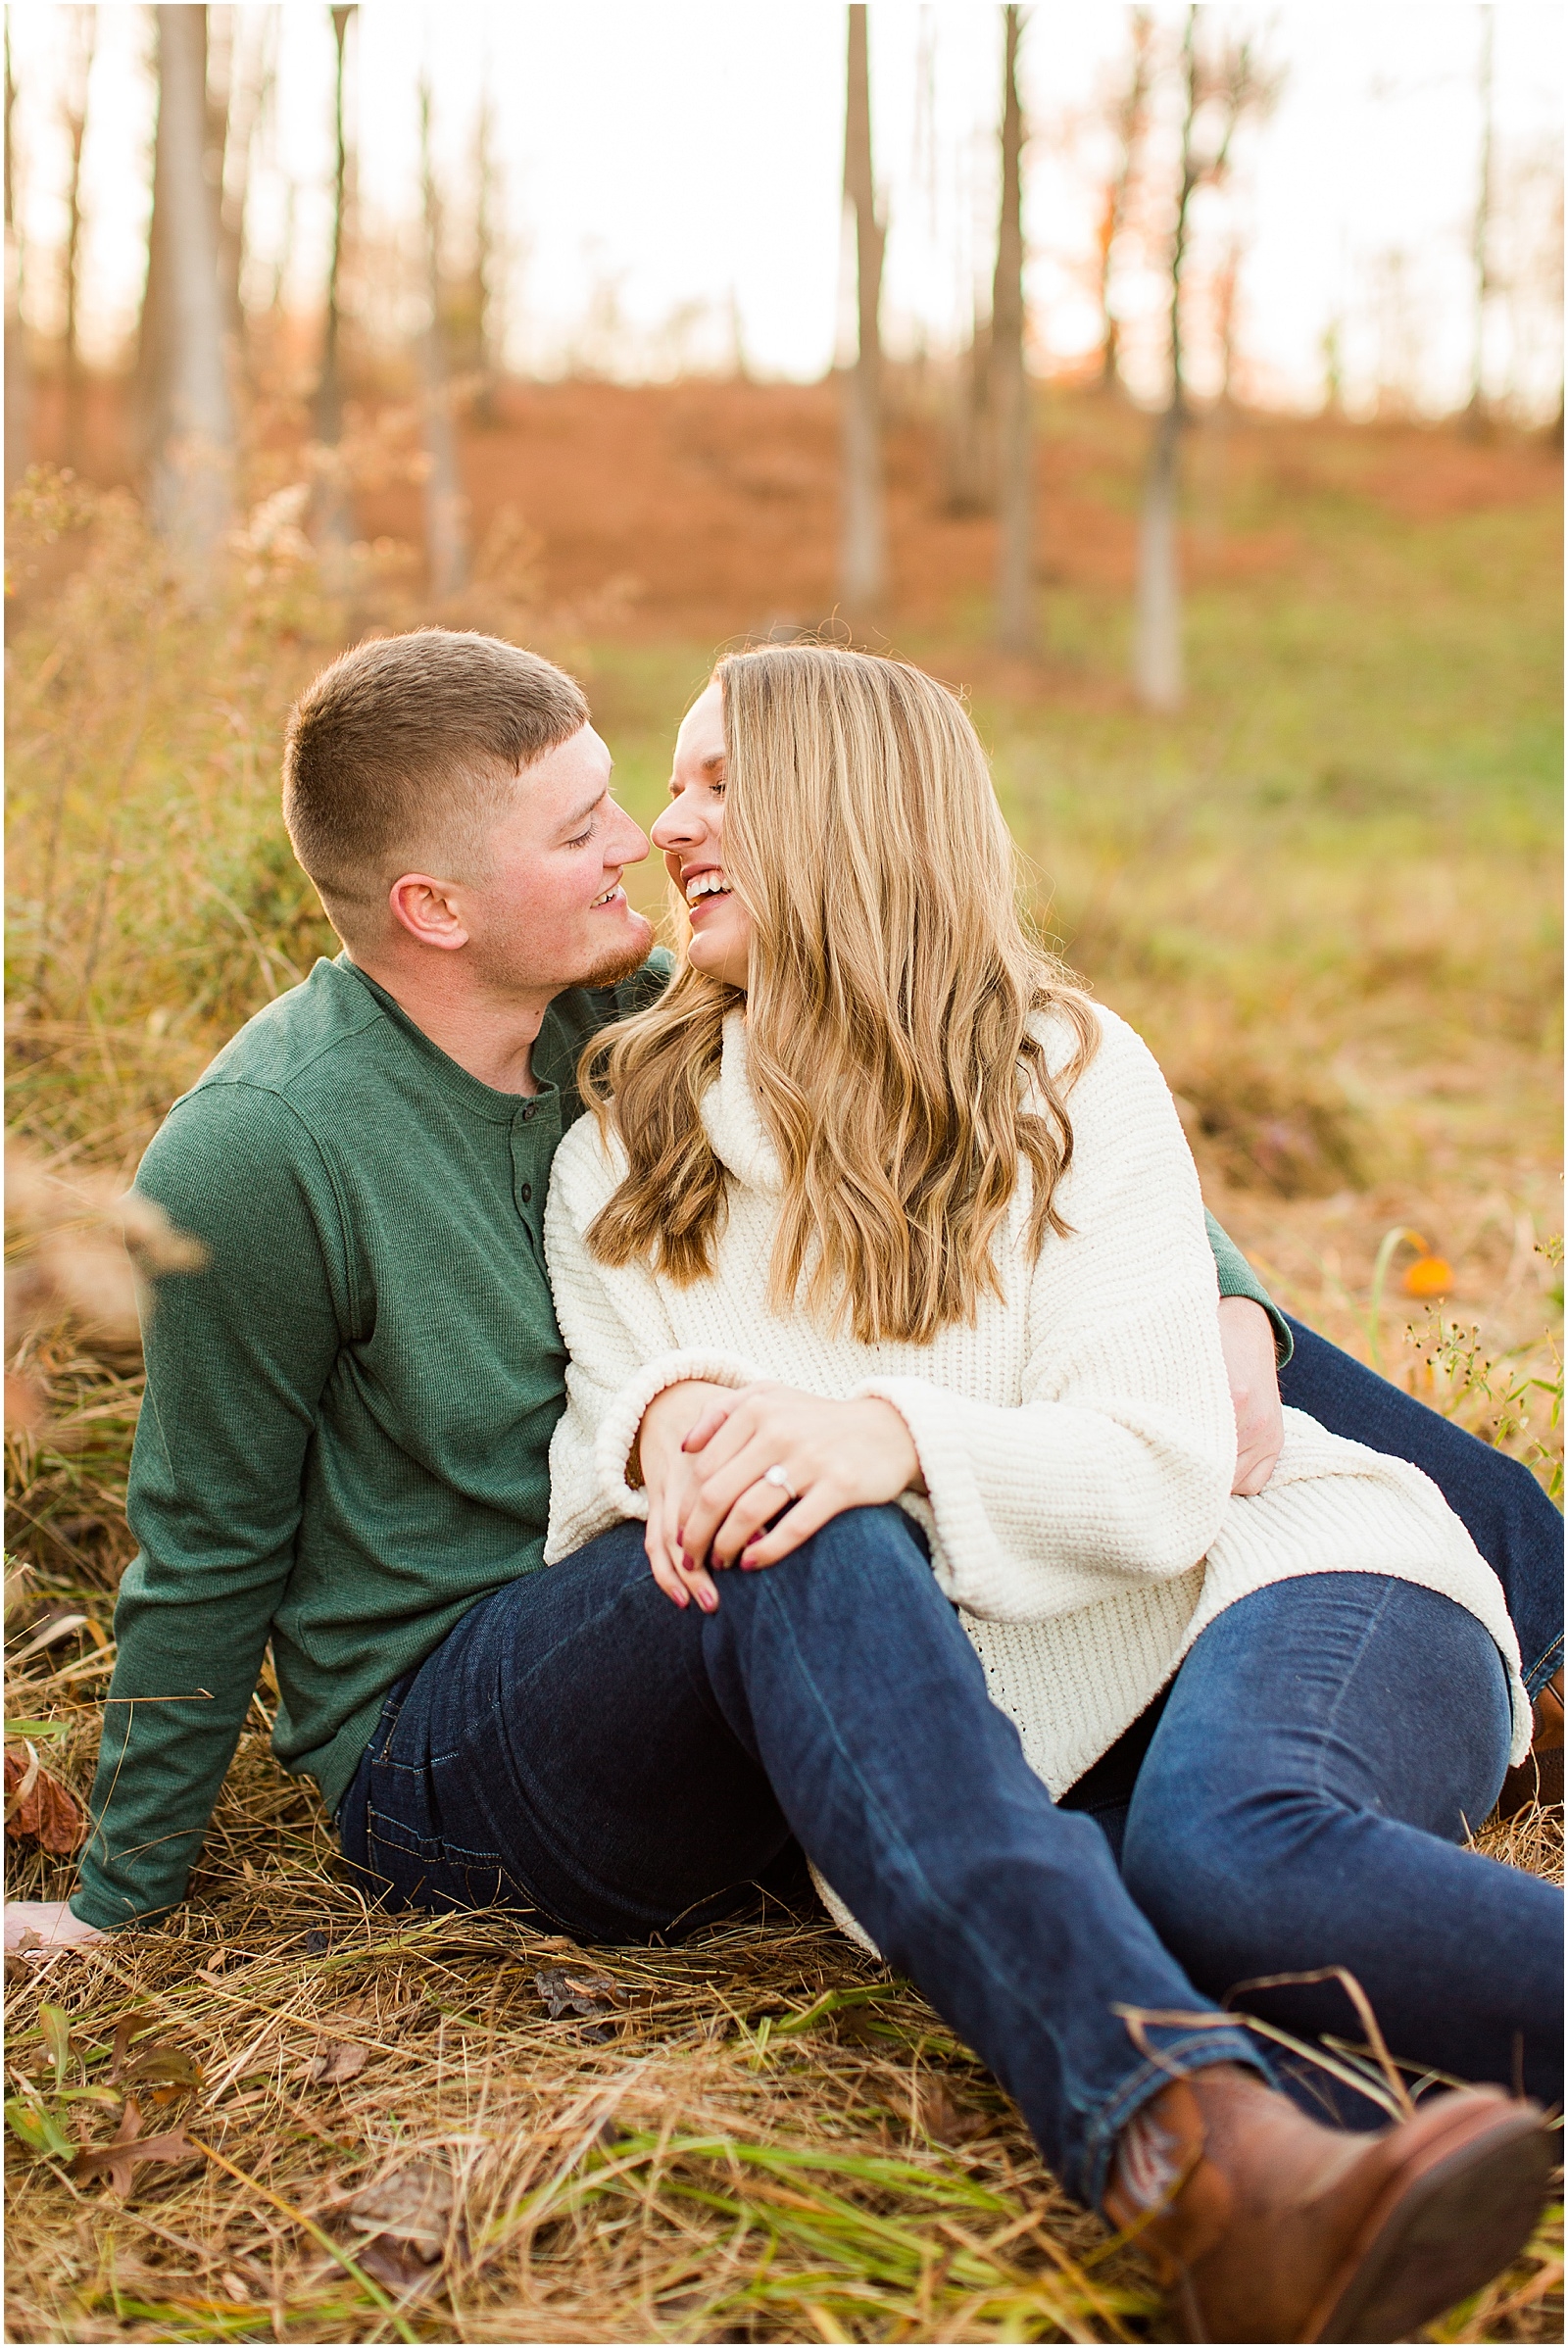 A Fall Southern Indiana Engagement Seesion | Cody and Hannah | Bret and Brandie Photography 037.jpg